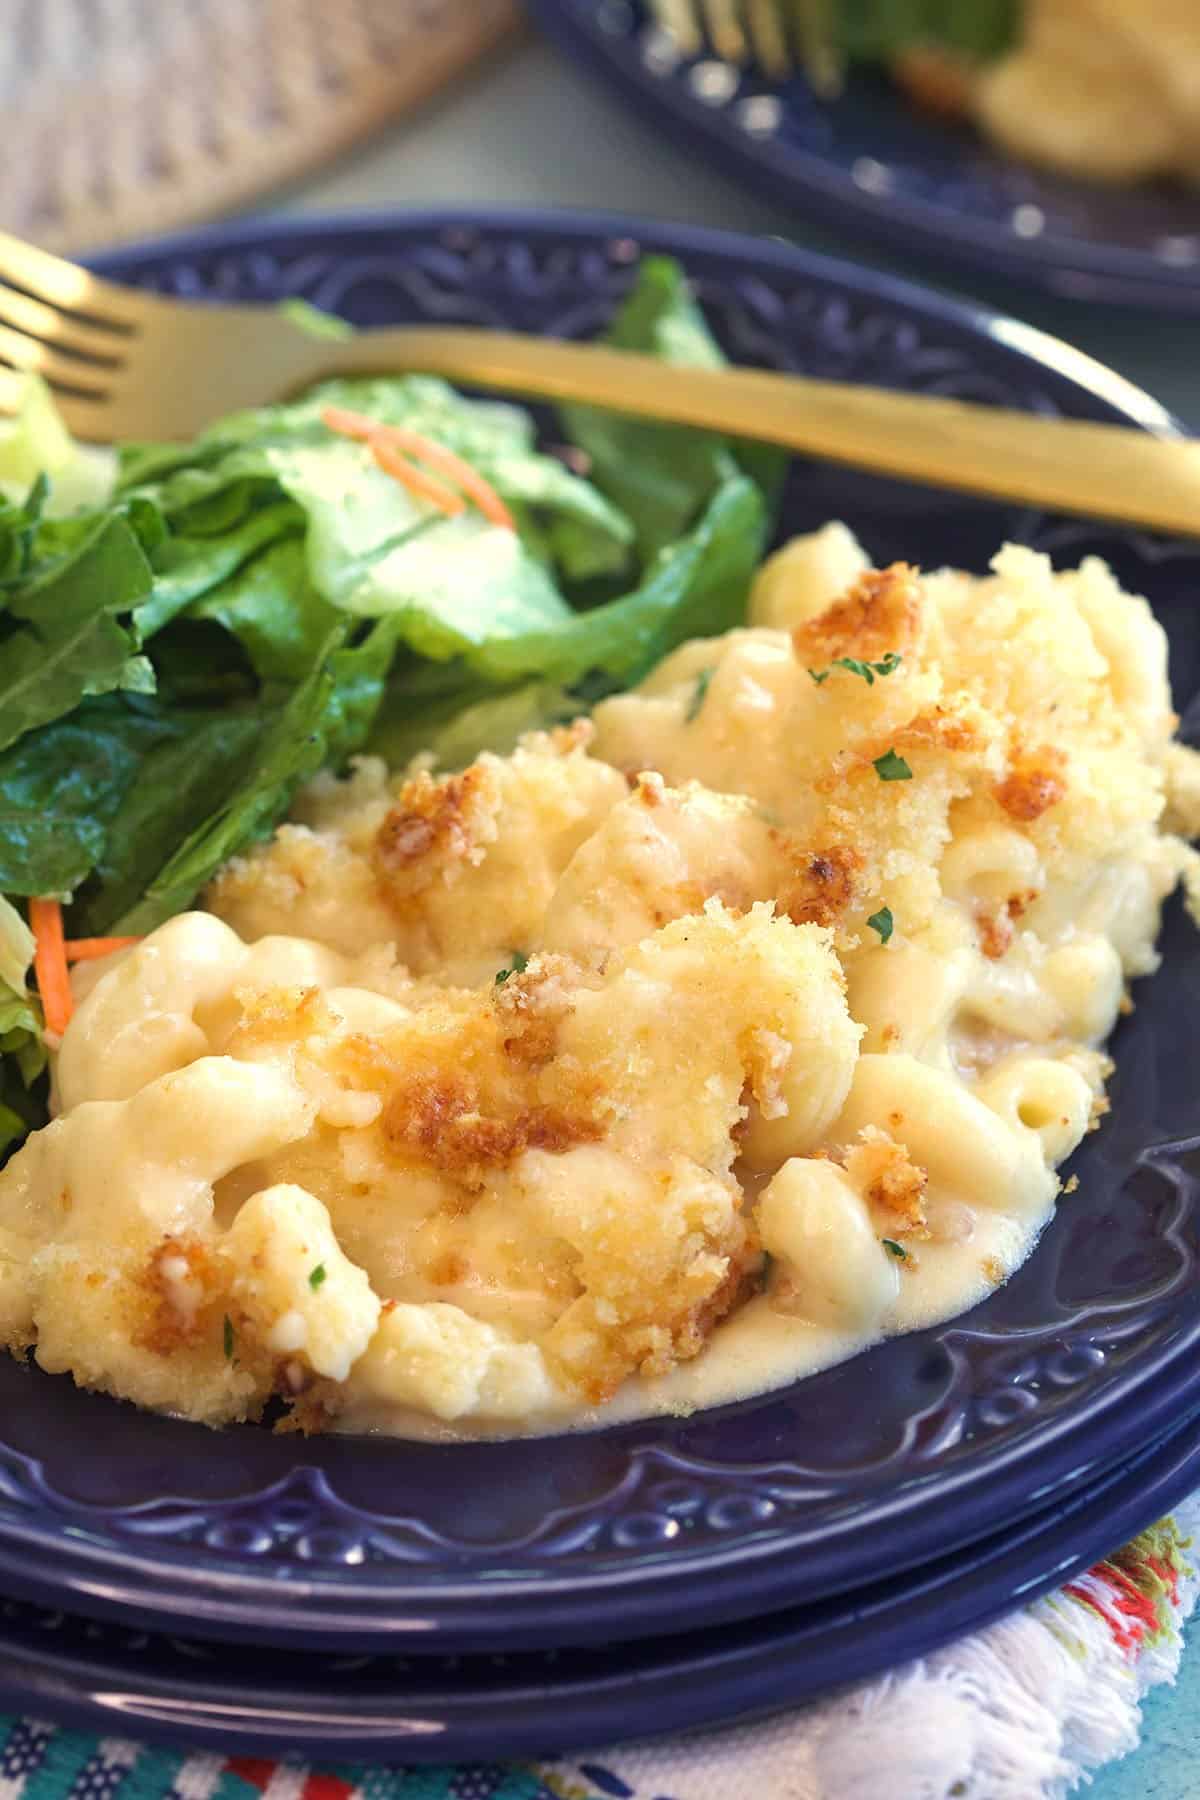 Homemade Mac and cheese on a blue plate with a garden salad.